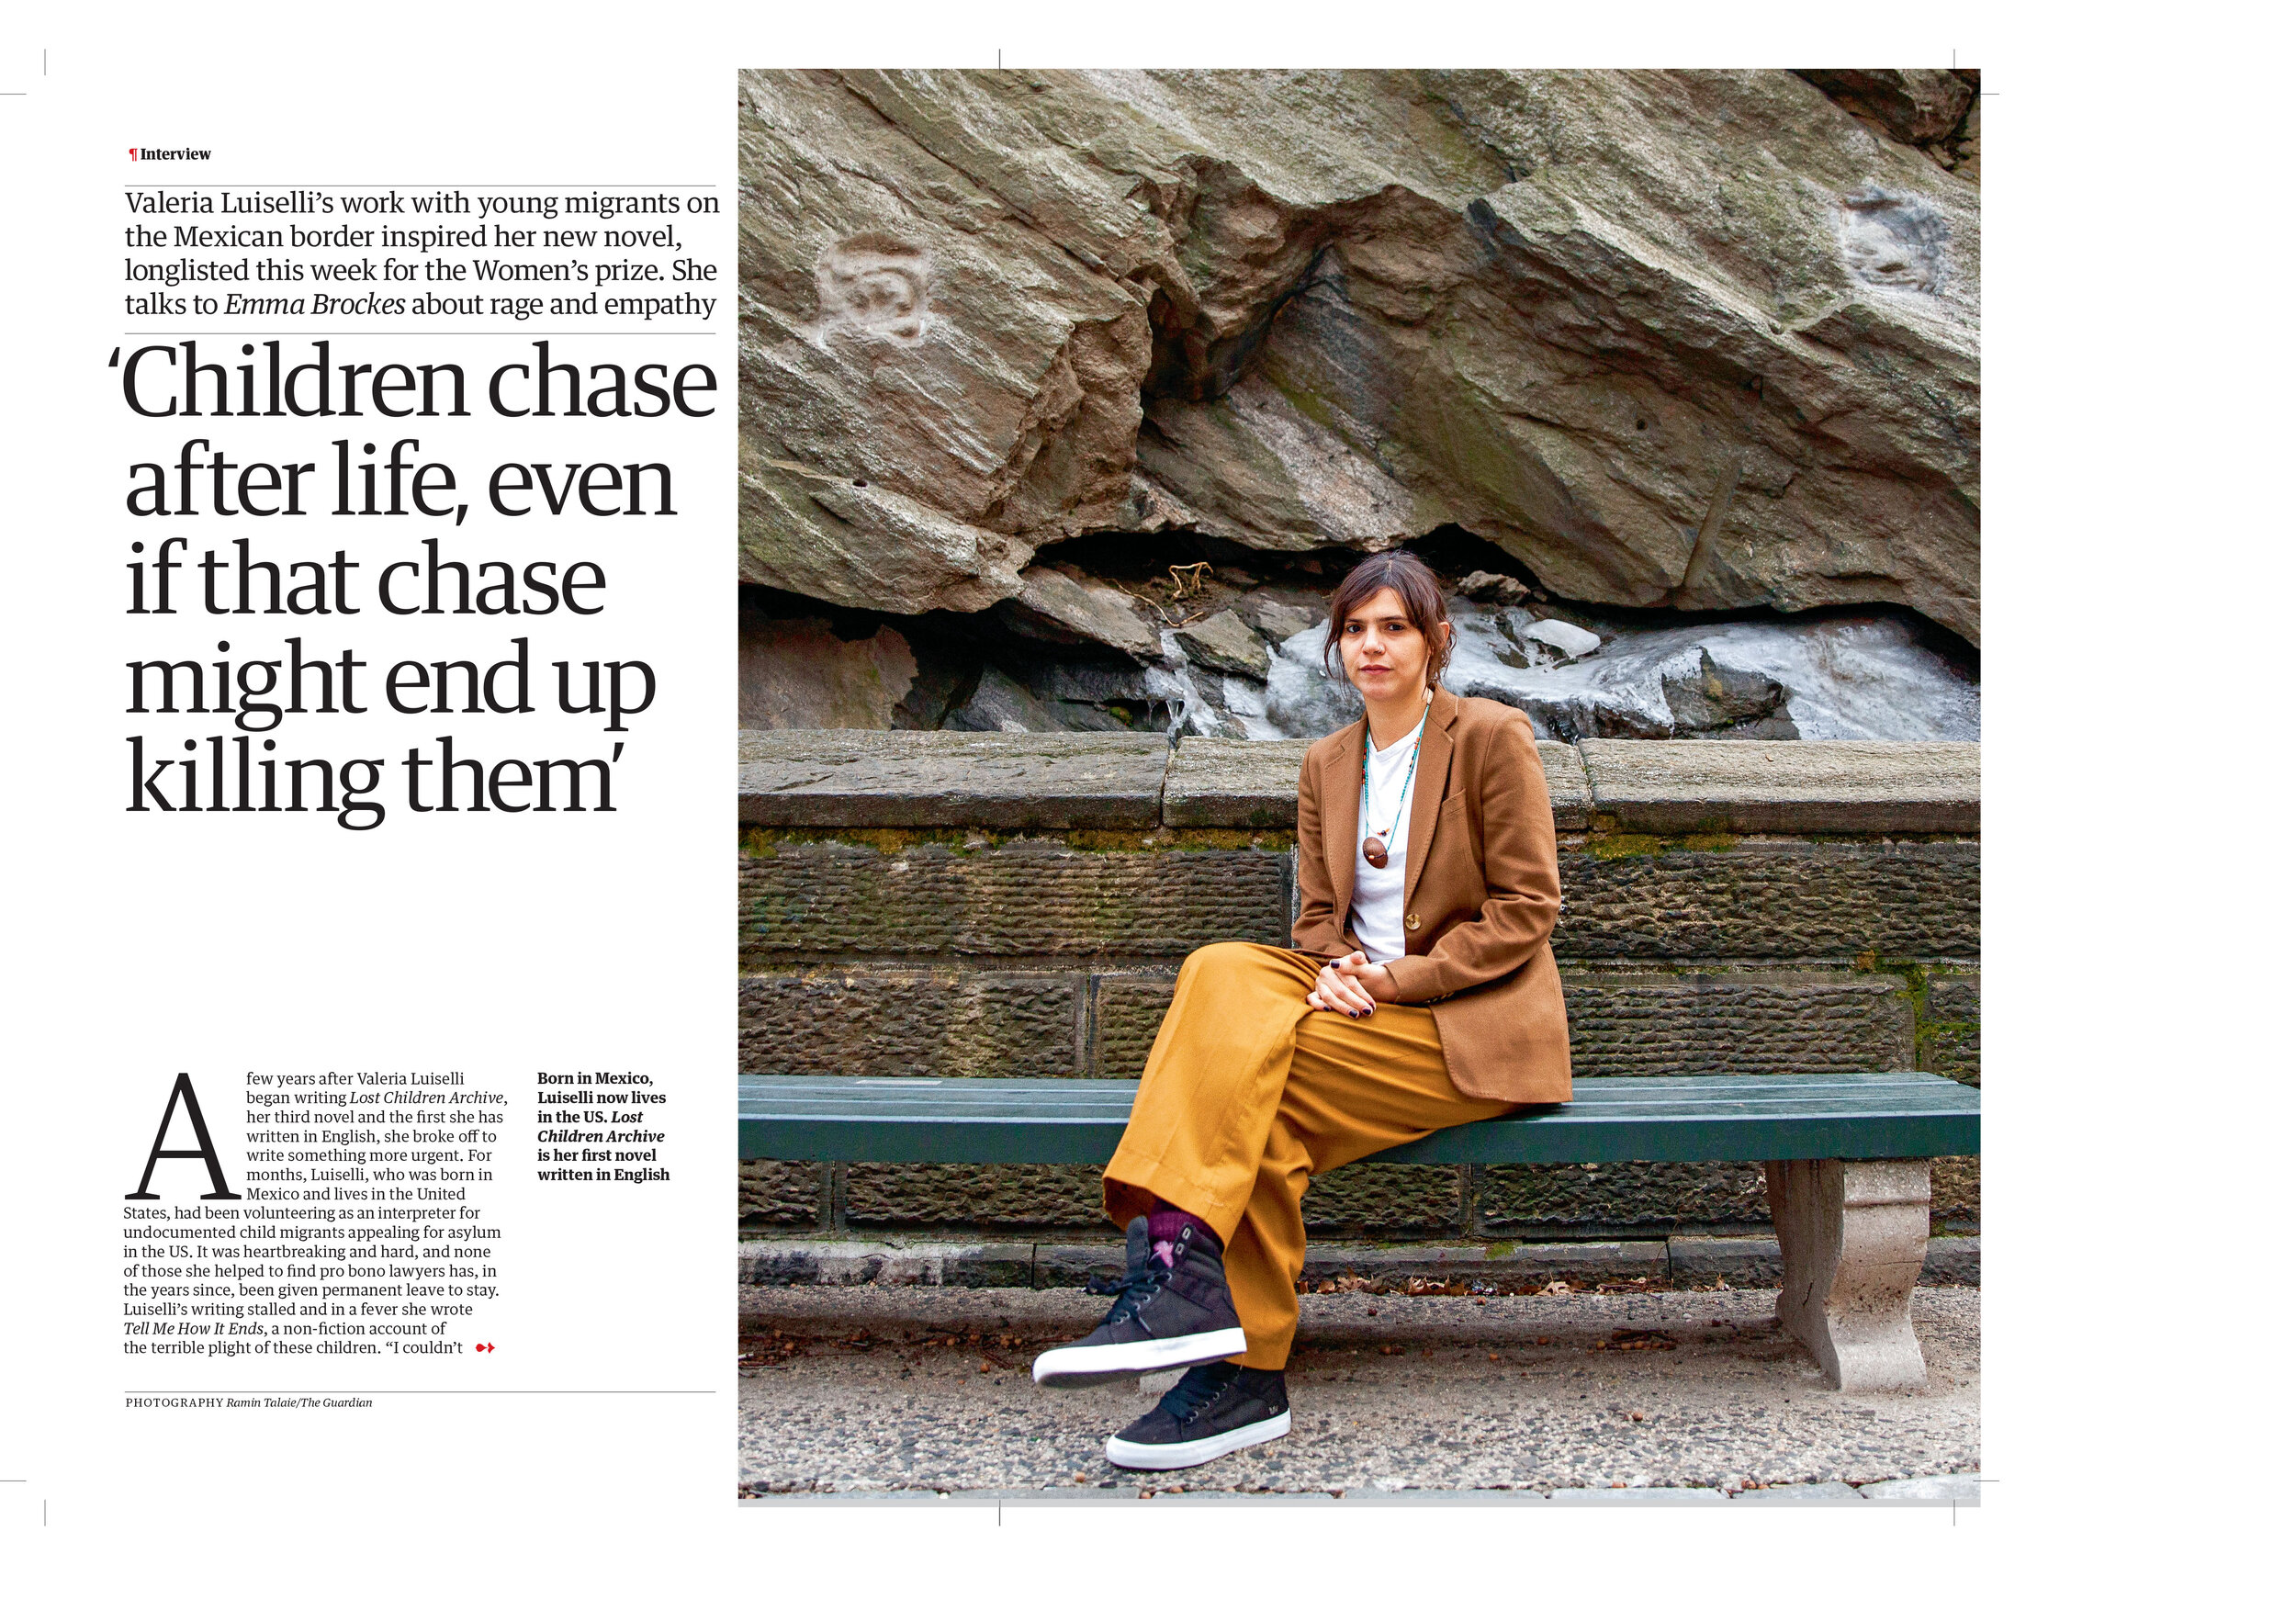 Activist and author Valeria Luiselli for The Guardian